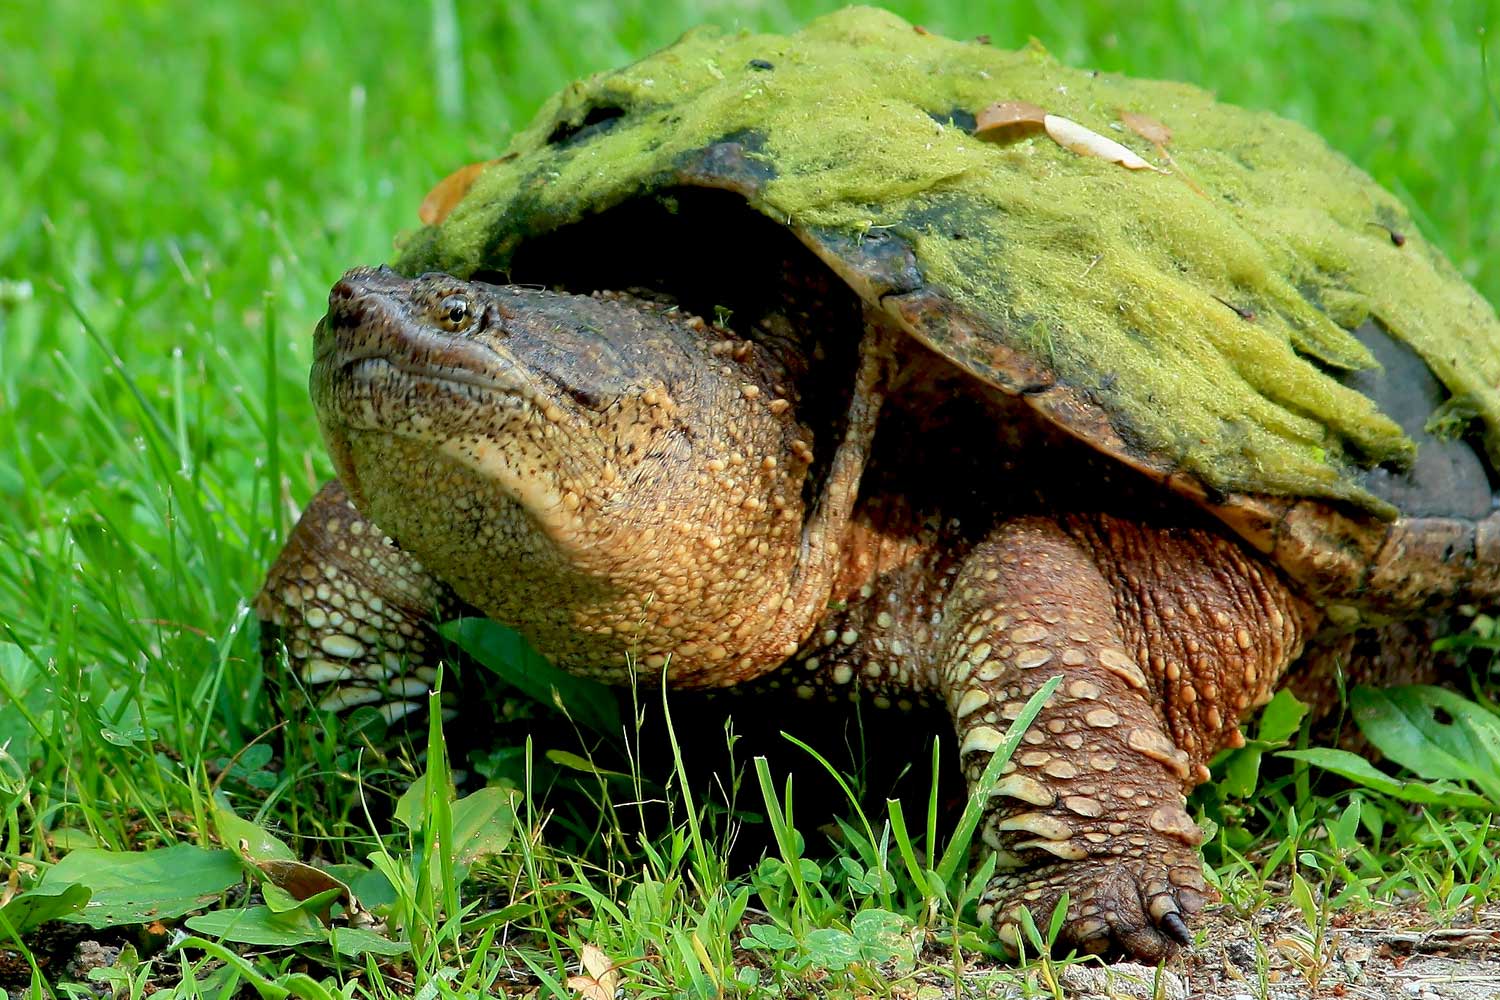 A snapping turtle with its shell covered in green vegetation standing in the grass.